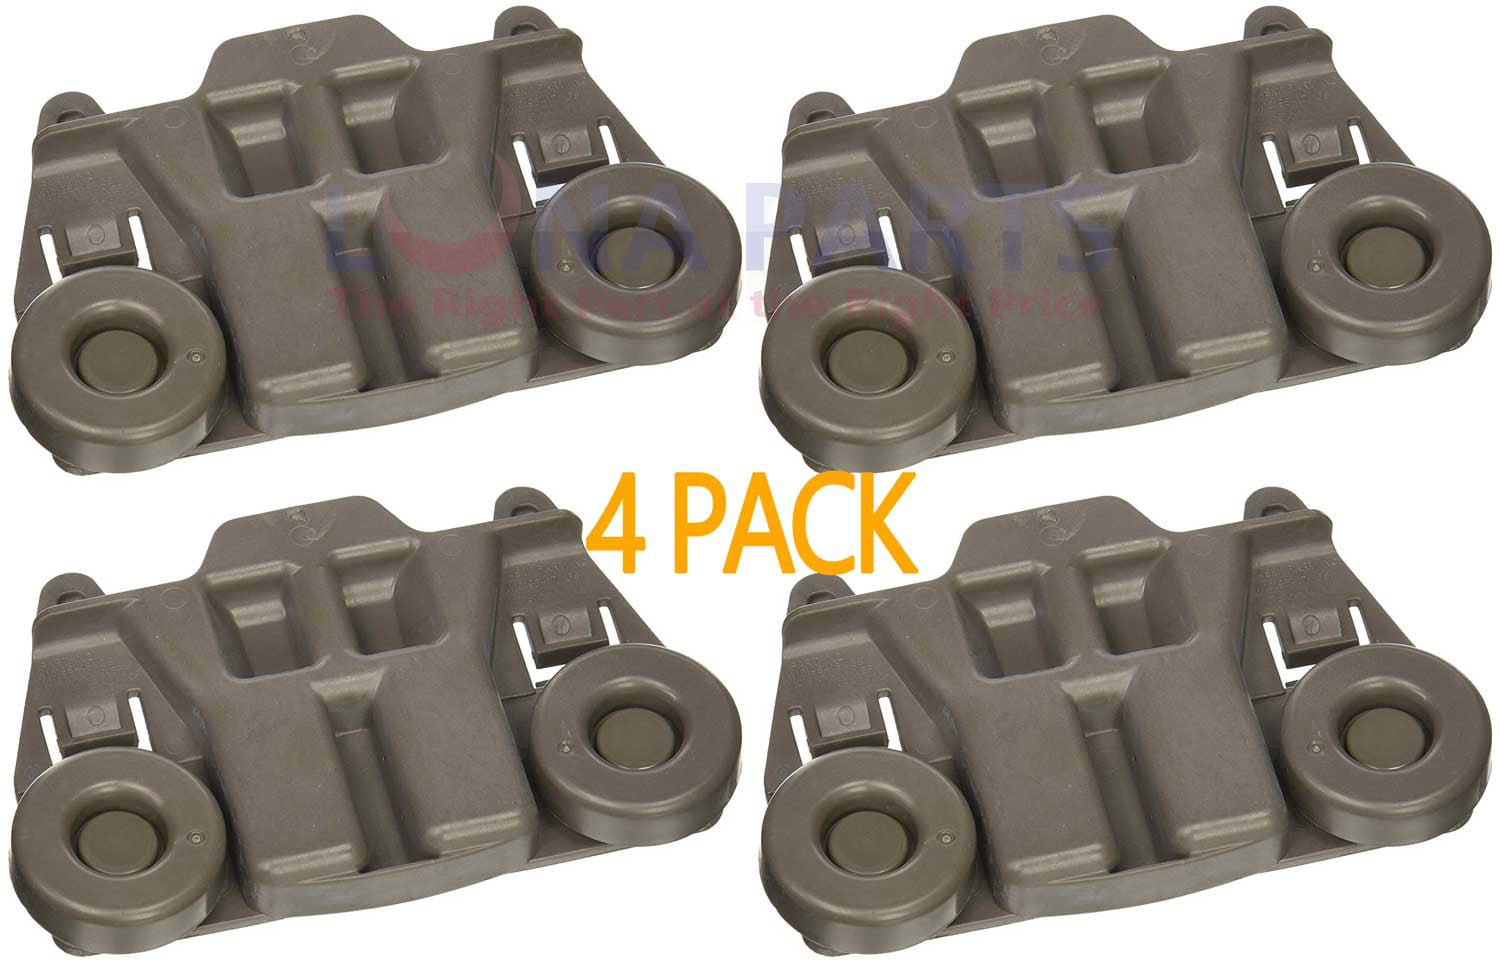 4pc Upgraded W10195417 Dishwasher Dishrack Rack Roller Fit For Whirlpool Kenmore 